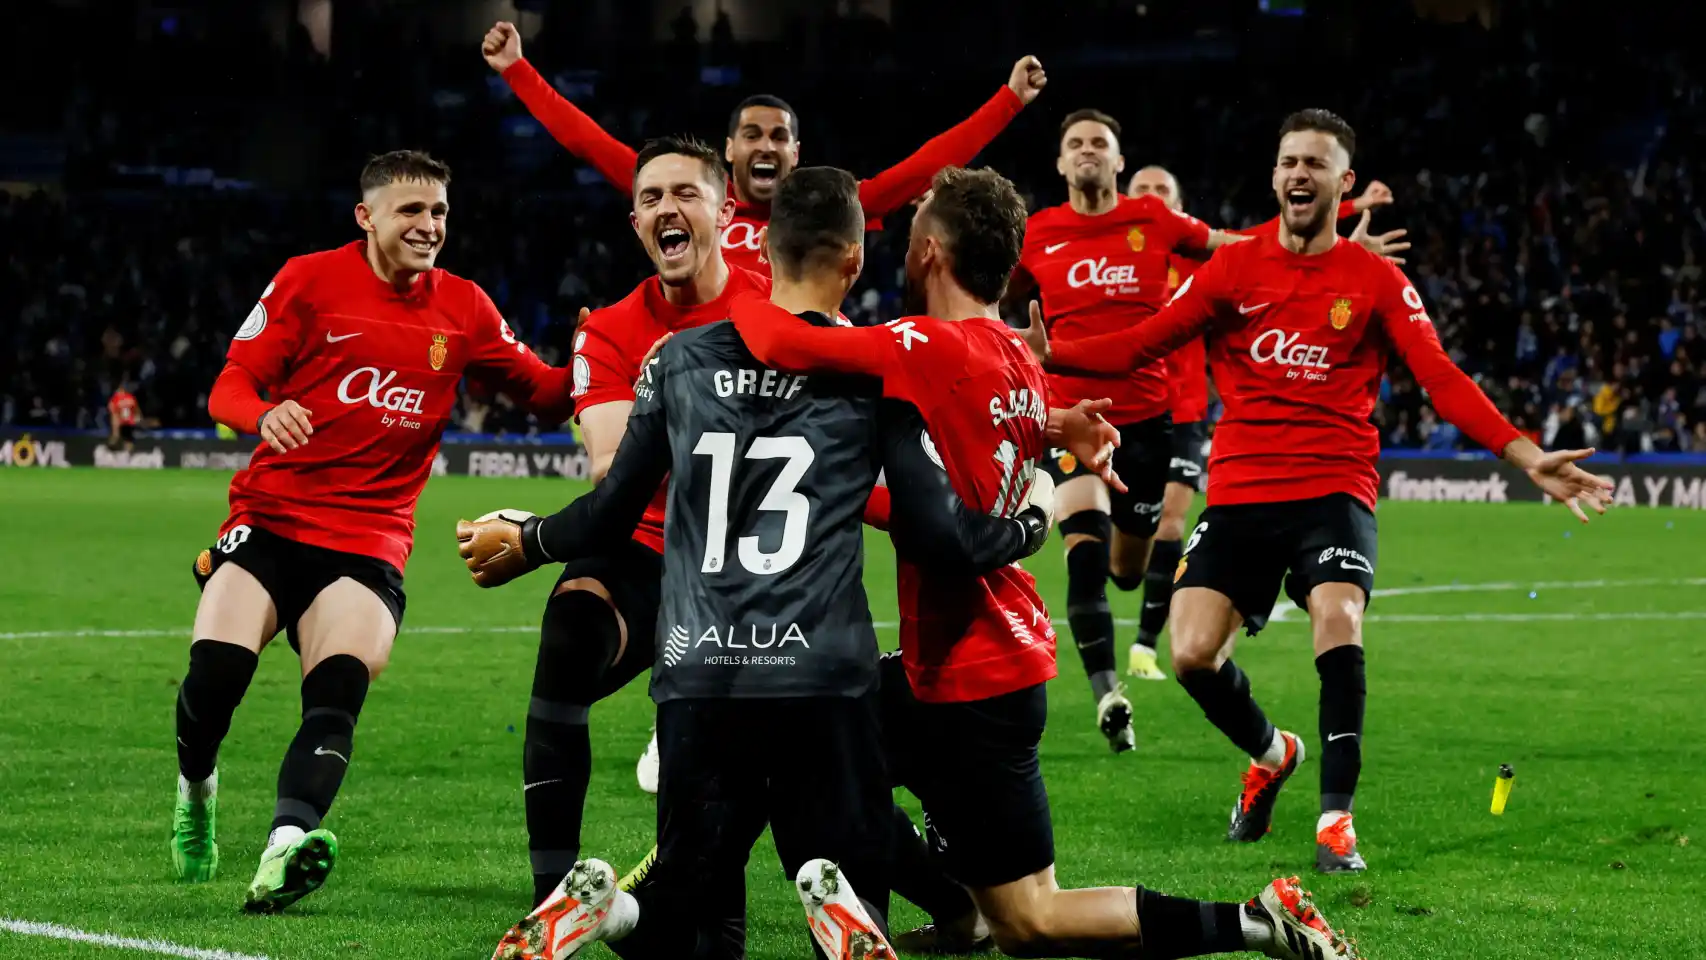 RCD Mallorca makes Real Sociedad doubly bitter by reaching the cup final
	

